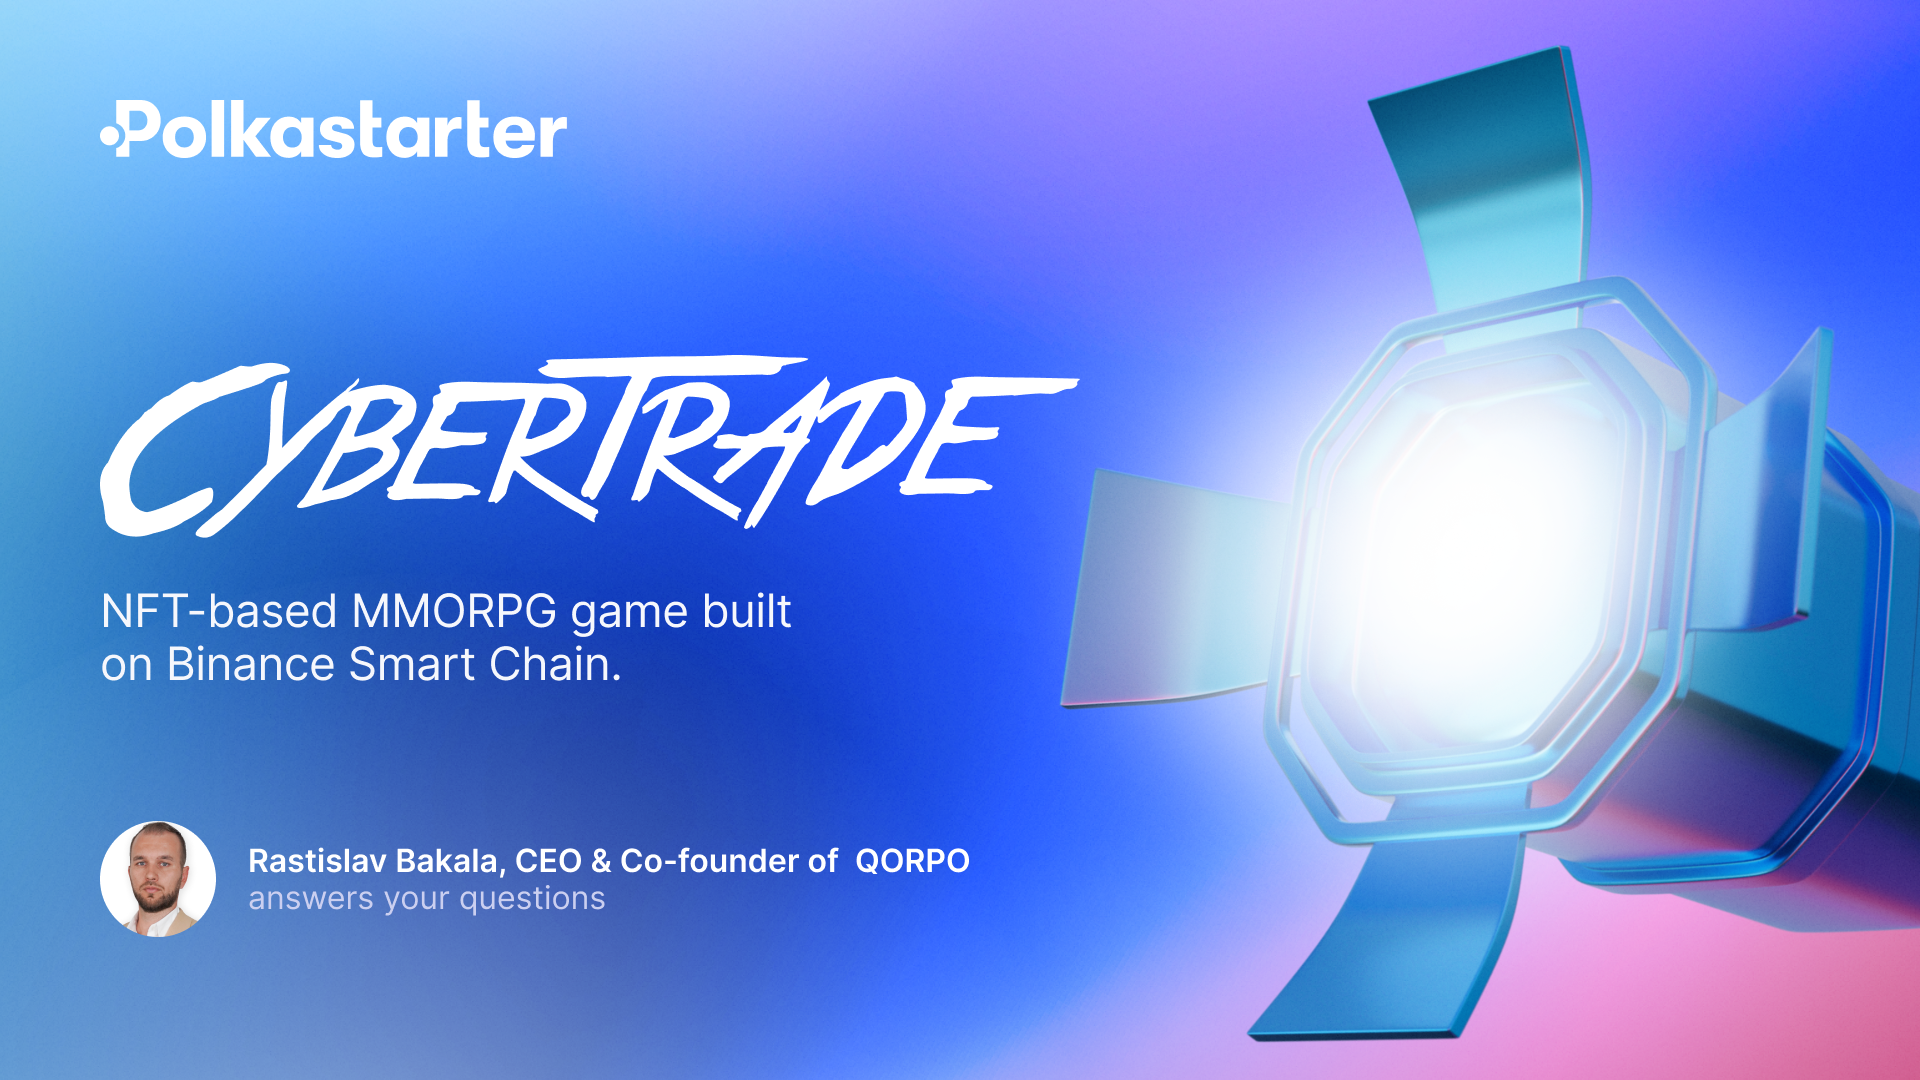 Get to Know: CyberTrade